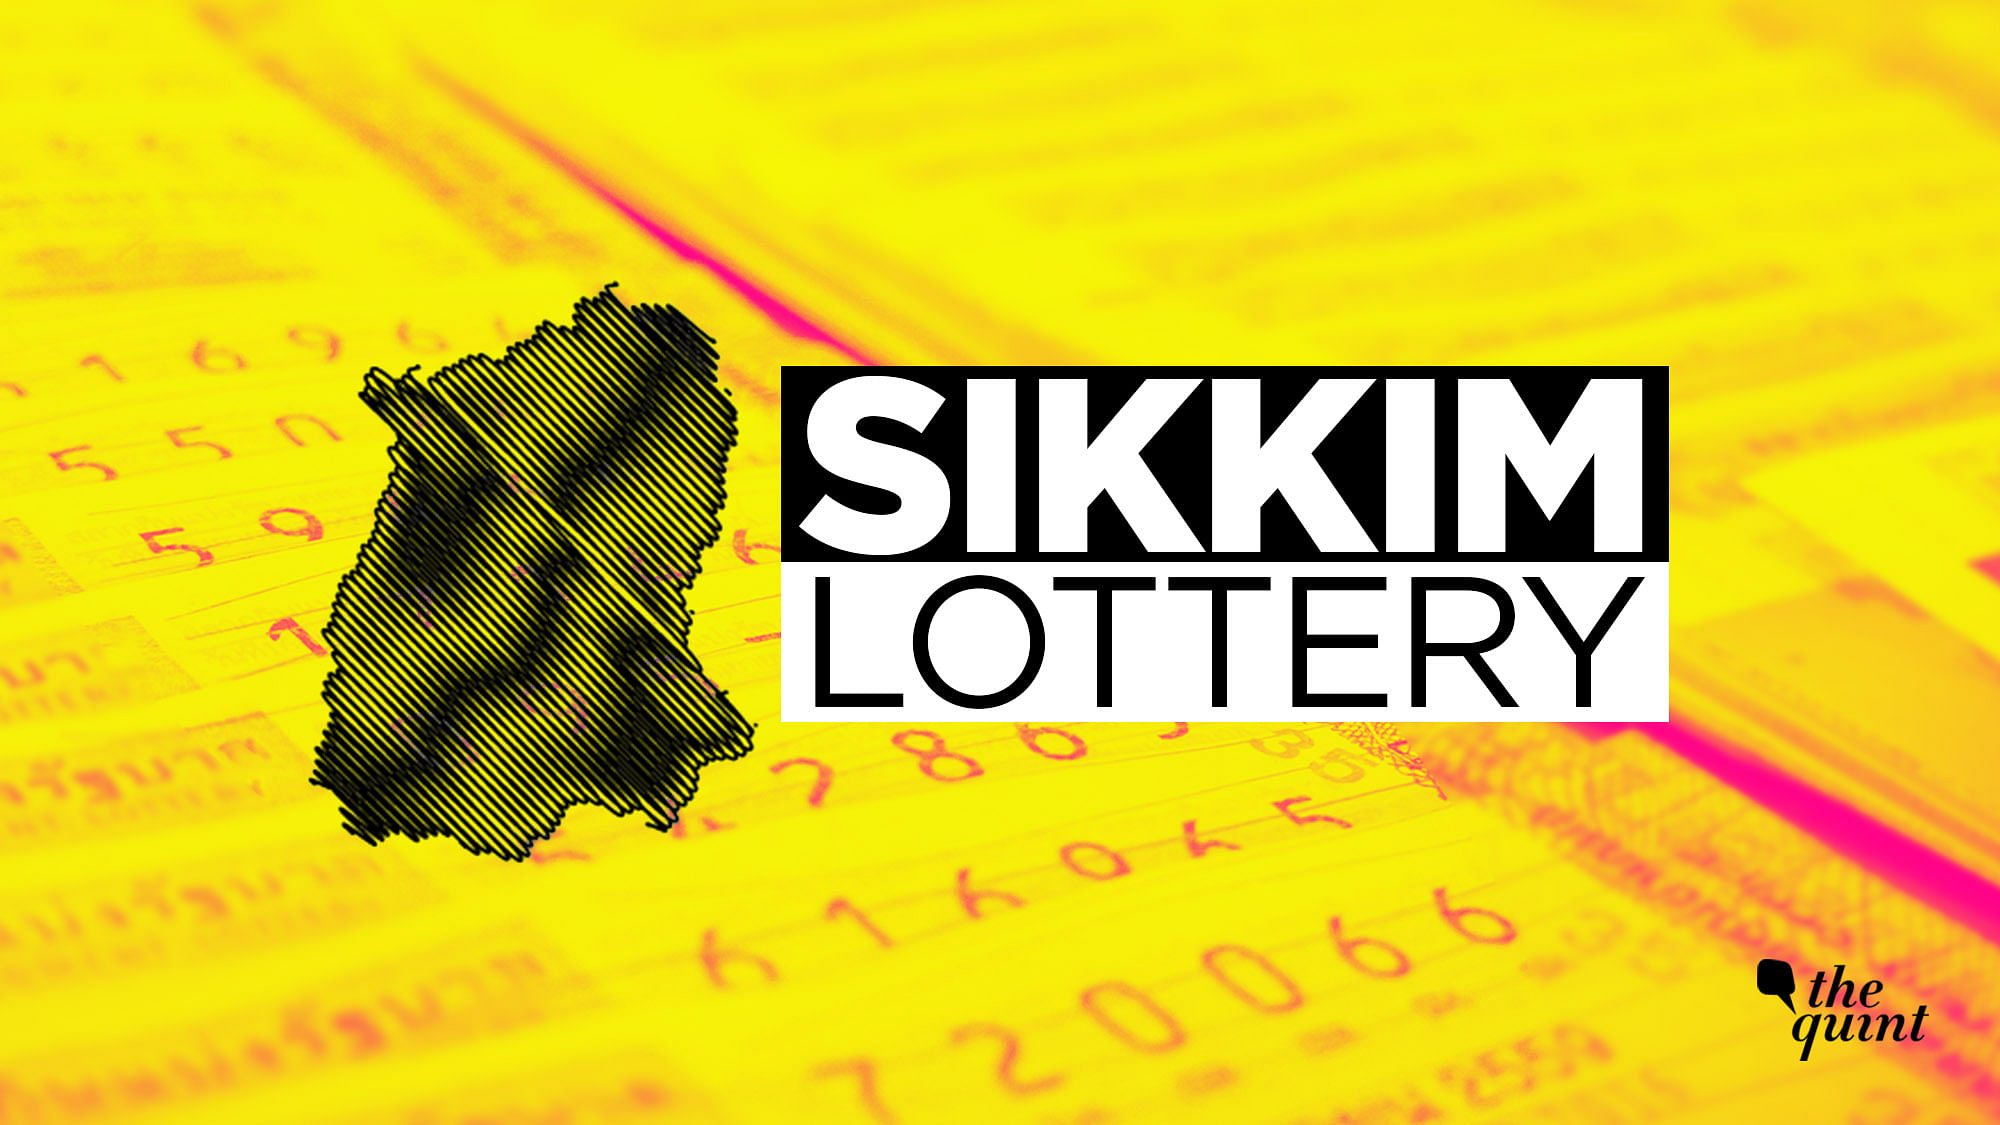 Today Lottery Sambad: The Sikkim lottery results will be declared at 11:55 am on 20 August 2019.